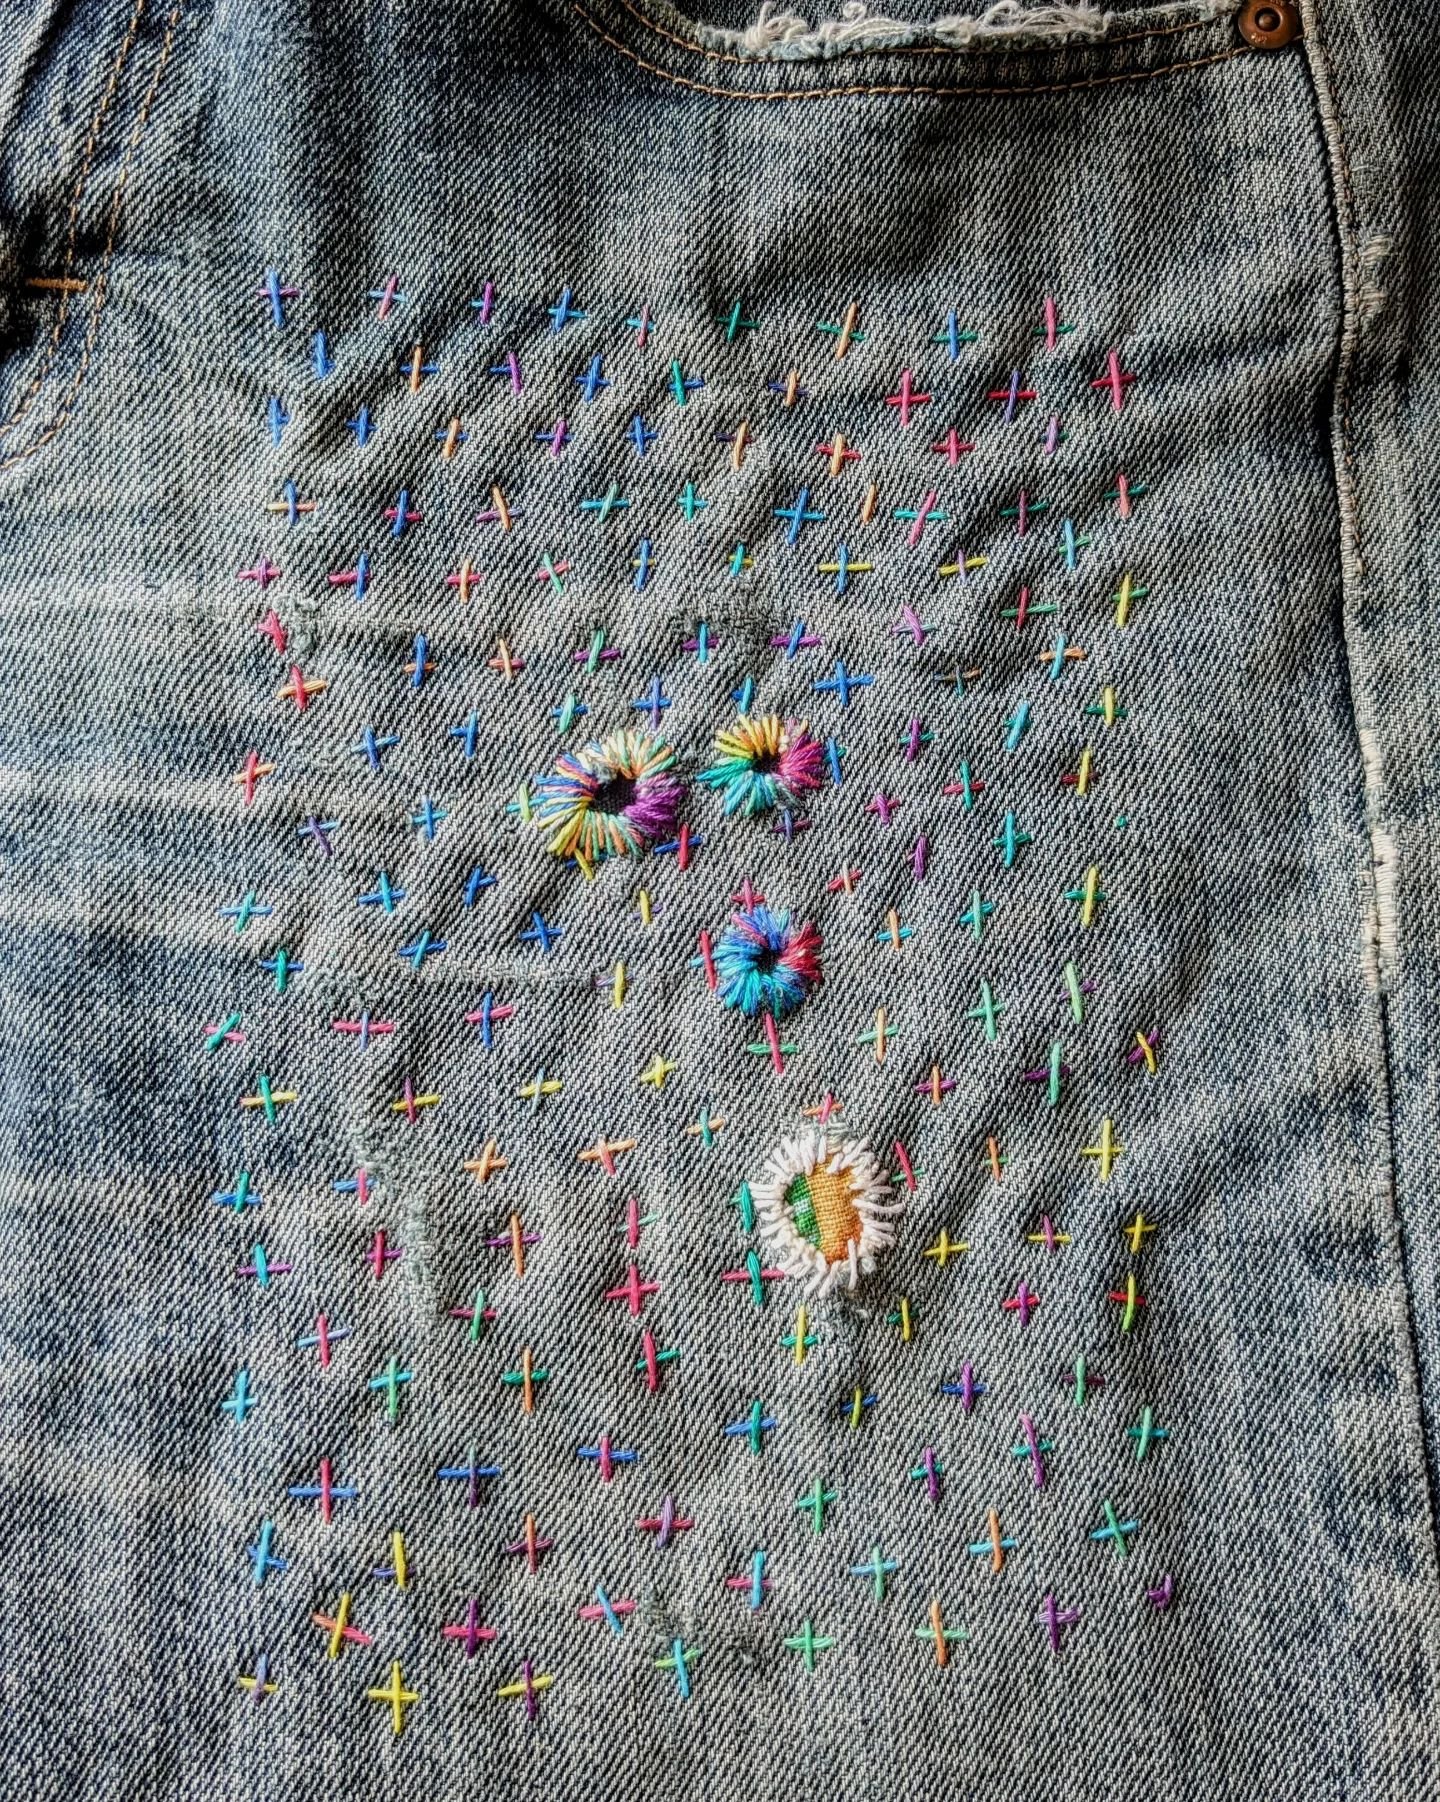 This week's @k3n.clothtales prompt was visible mending. My mending basket is overflowing so I worked on a pair of D's pants. The white thread is older repairs, the rainbow thread is new. 
.
.
.
#slowstitch #slowstitching #slowstichwithk3n #visiblemen